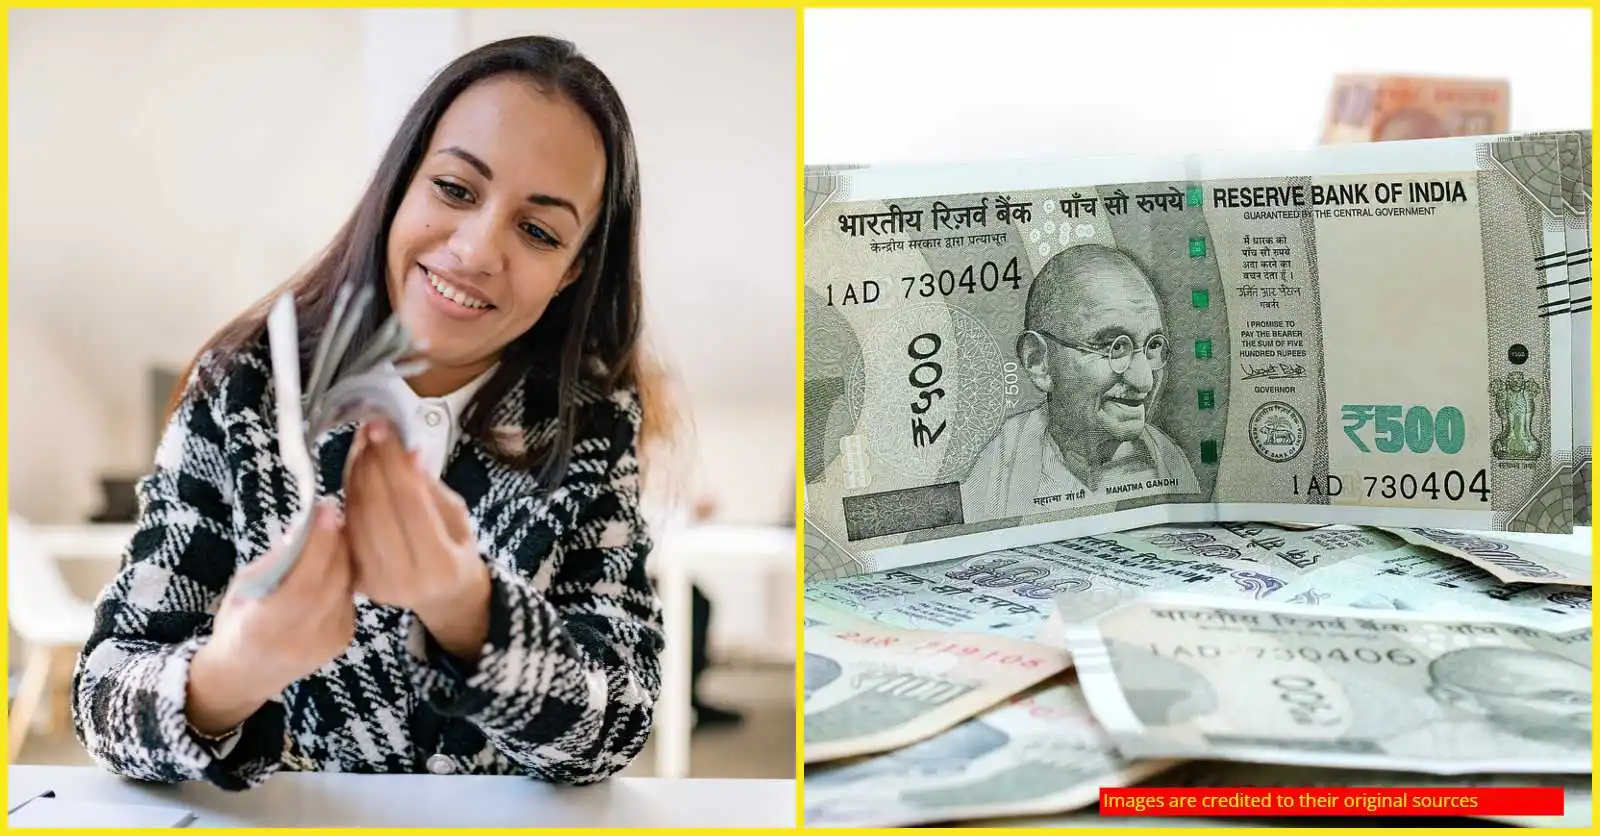 Here is how you can get a loan with low cibil score - Documents required, Eligibility and other details explained.